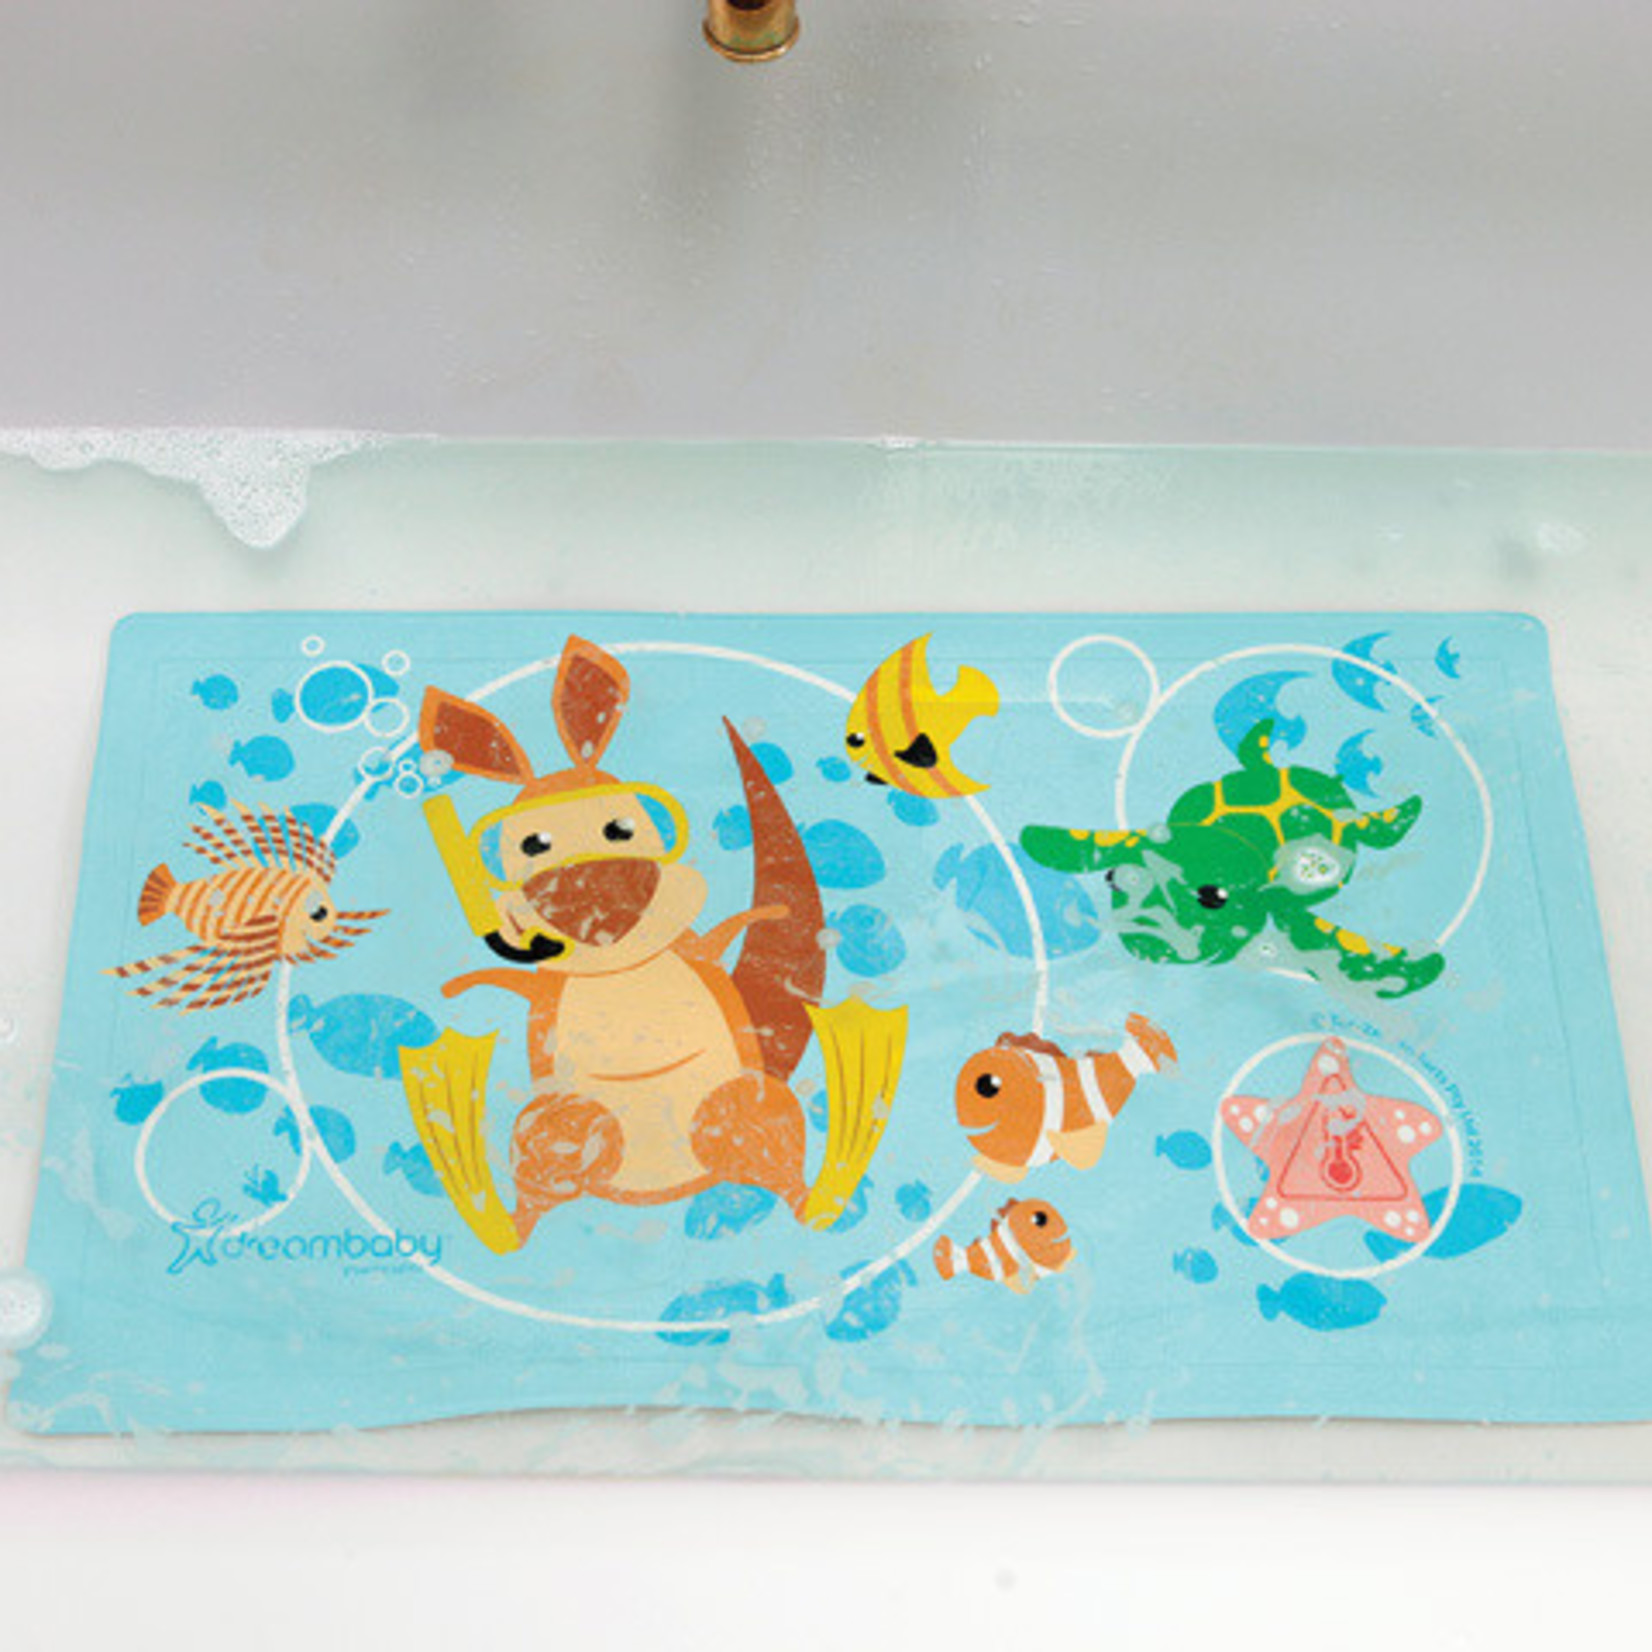 Dreambaby WATCH-YOUR-STEP® ANTI-SLIP BATH MAT WITH 'TOO HOT’ INDICATOR